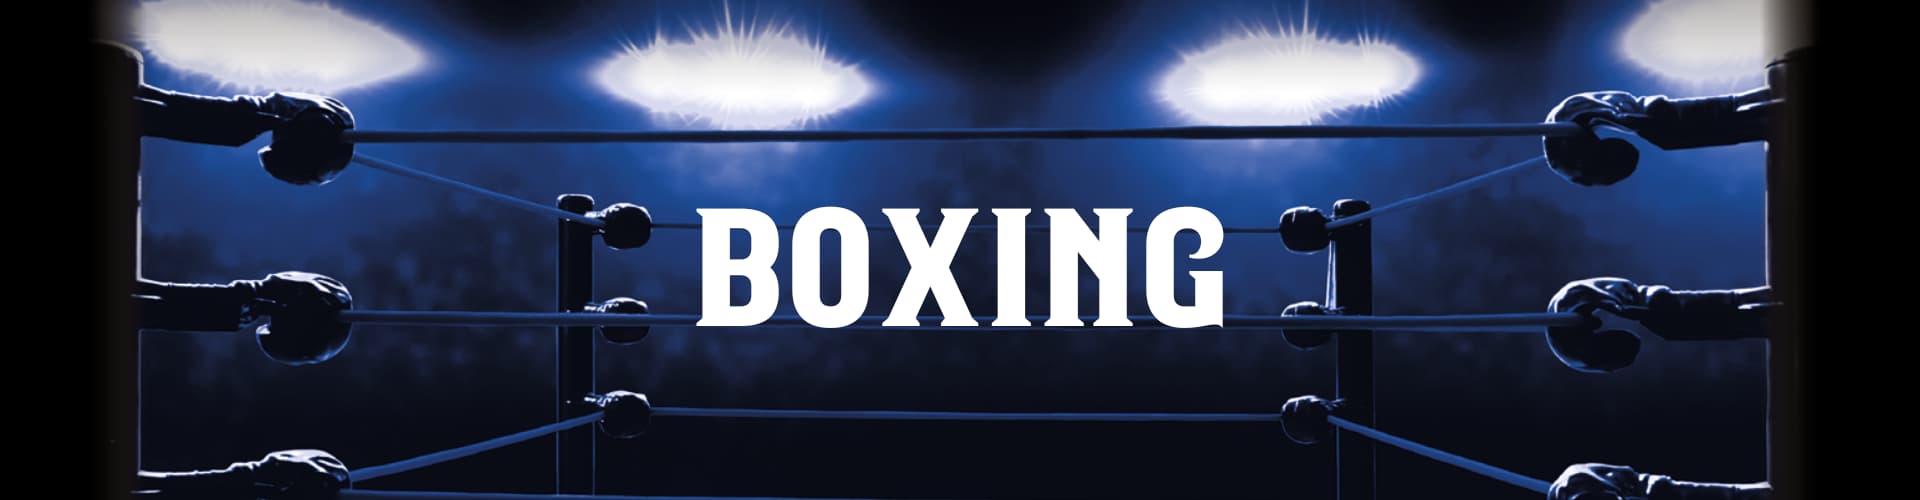 Watch Live Boxing in Sittingbourne at The Vineyard Pub